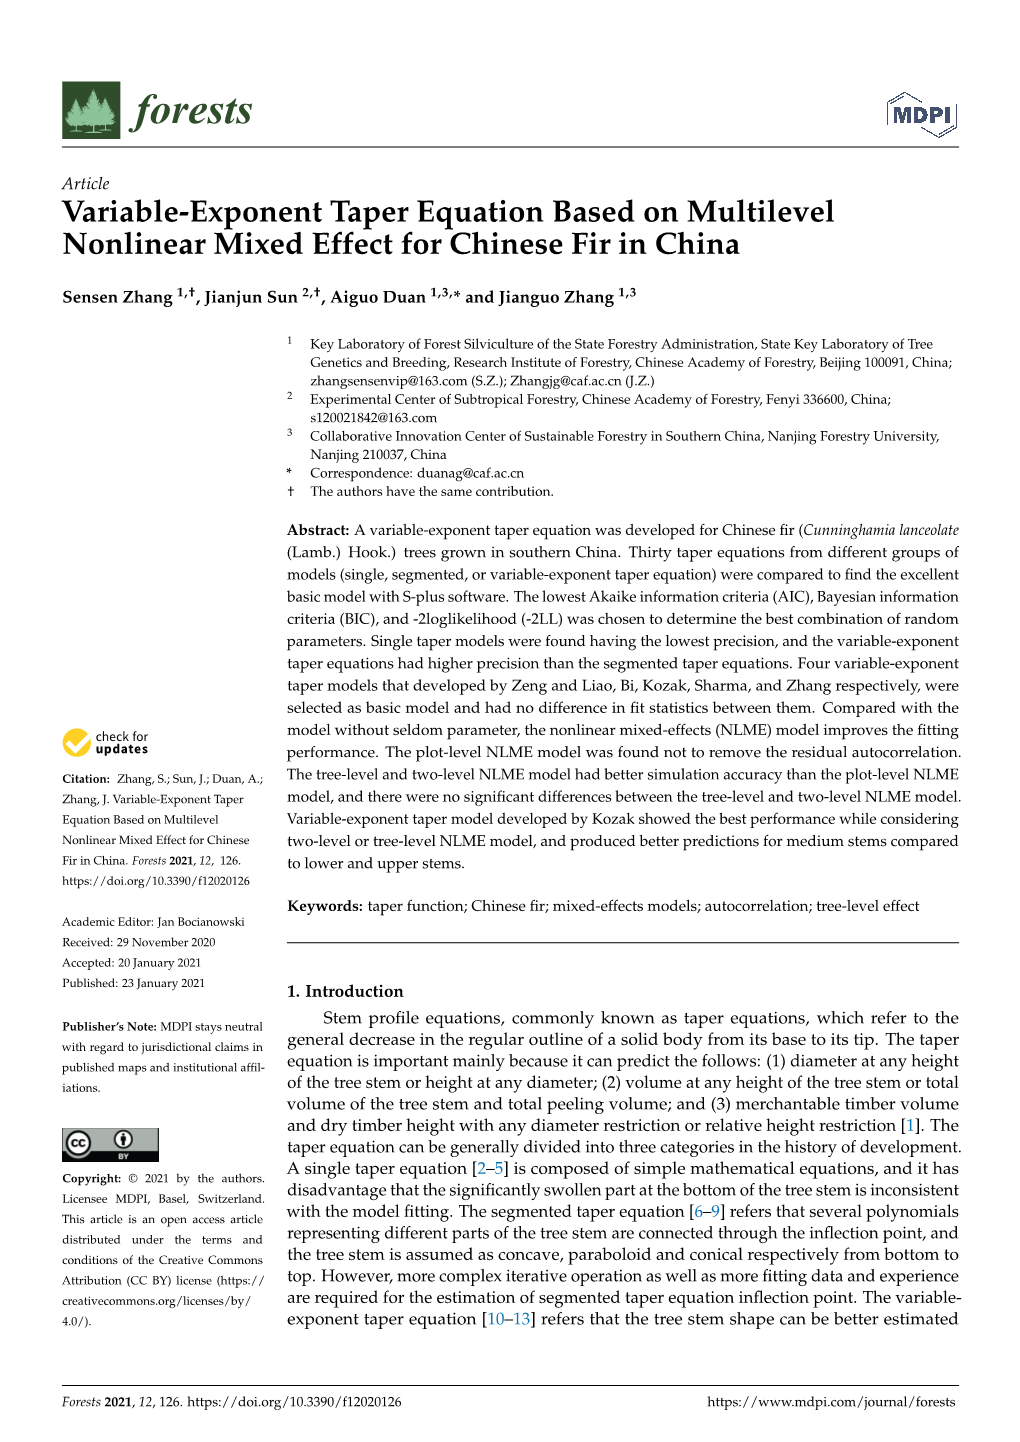 Variable-Exponent Taper Equation Based on Multilevel Nonlinear Mixed Effect for Chinese Fir in China